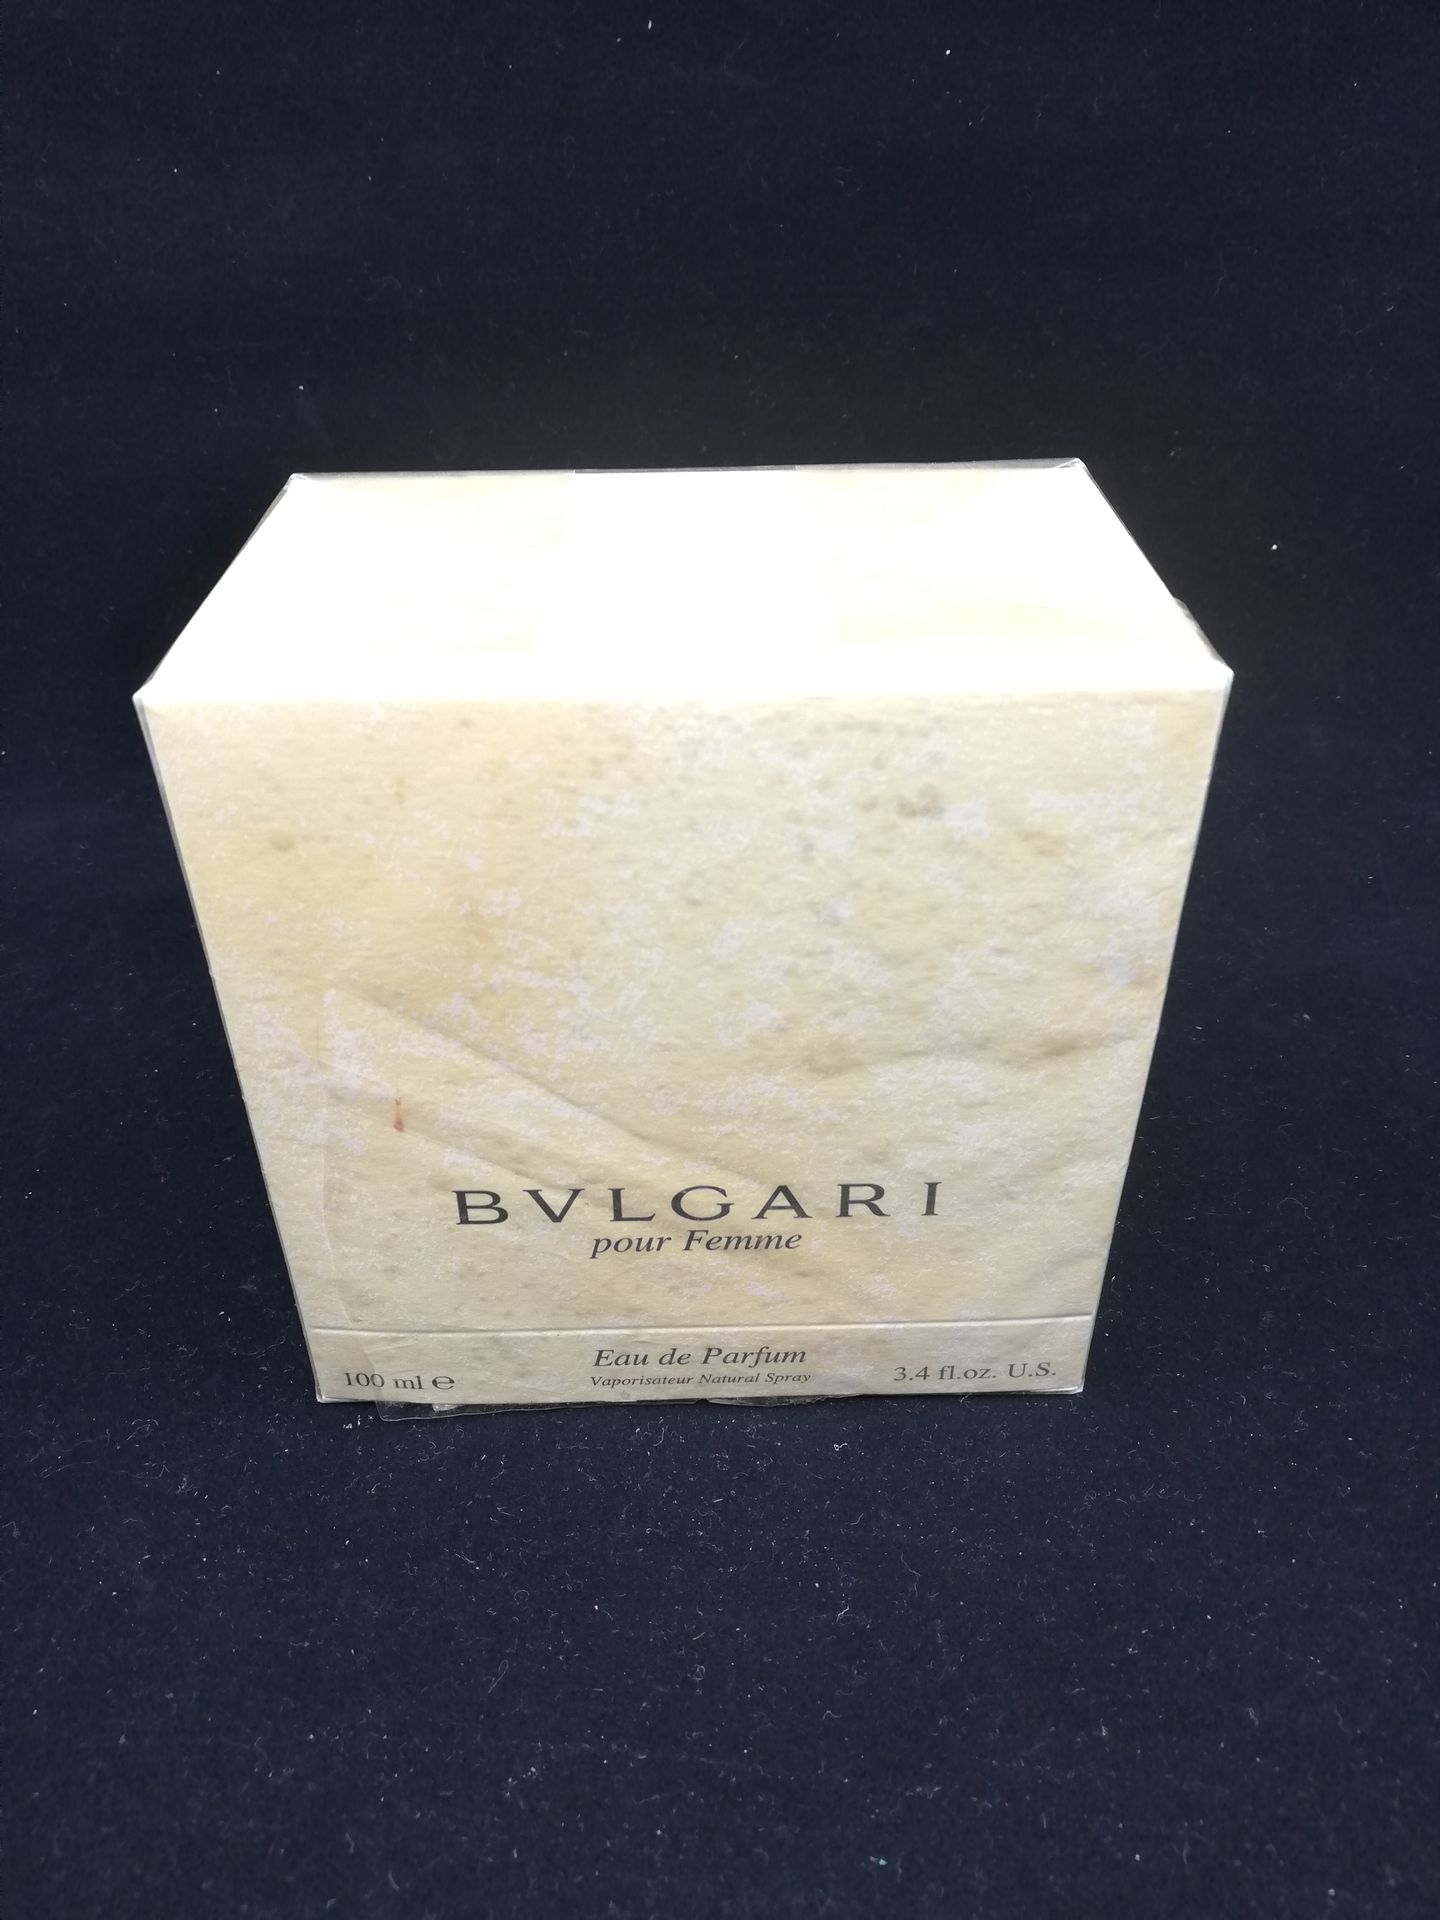 Null Bulgari - "For Woman" -(1994)

Presented in its cellophane titled cardboard&hellip;